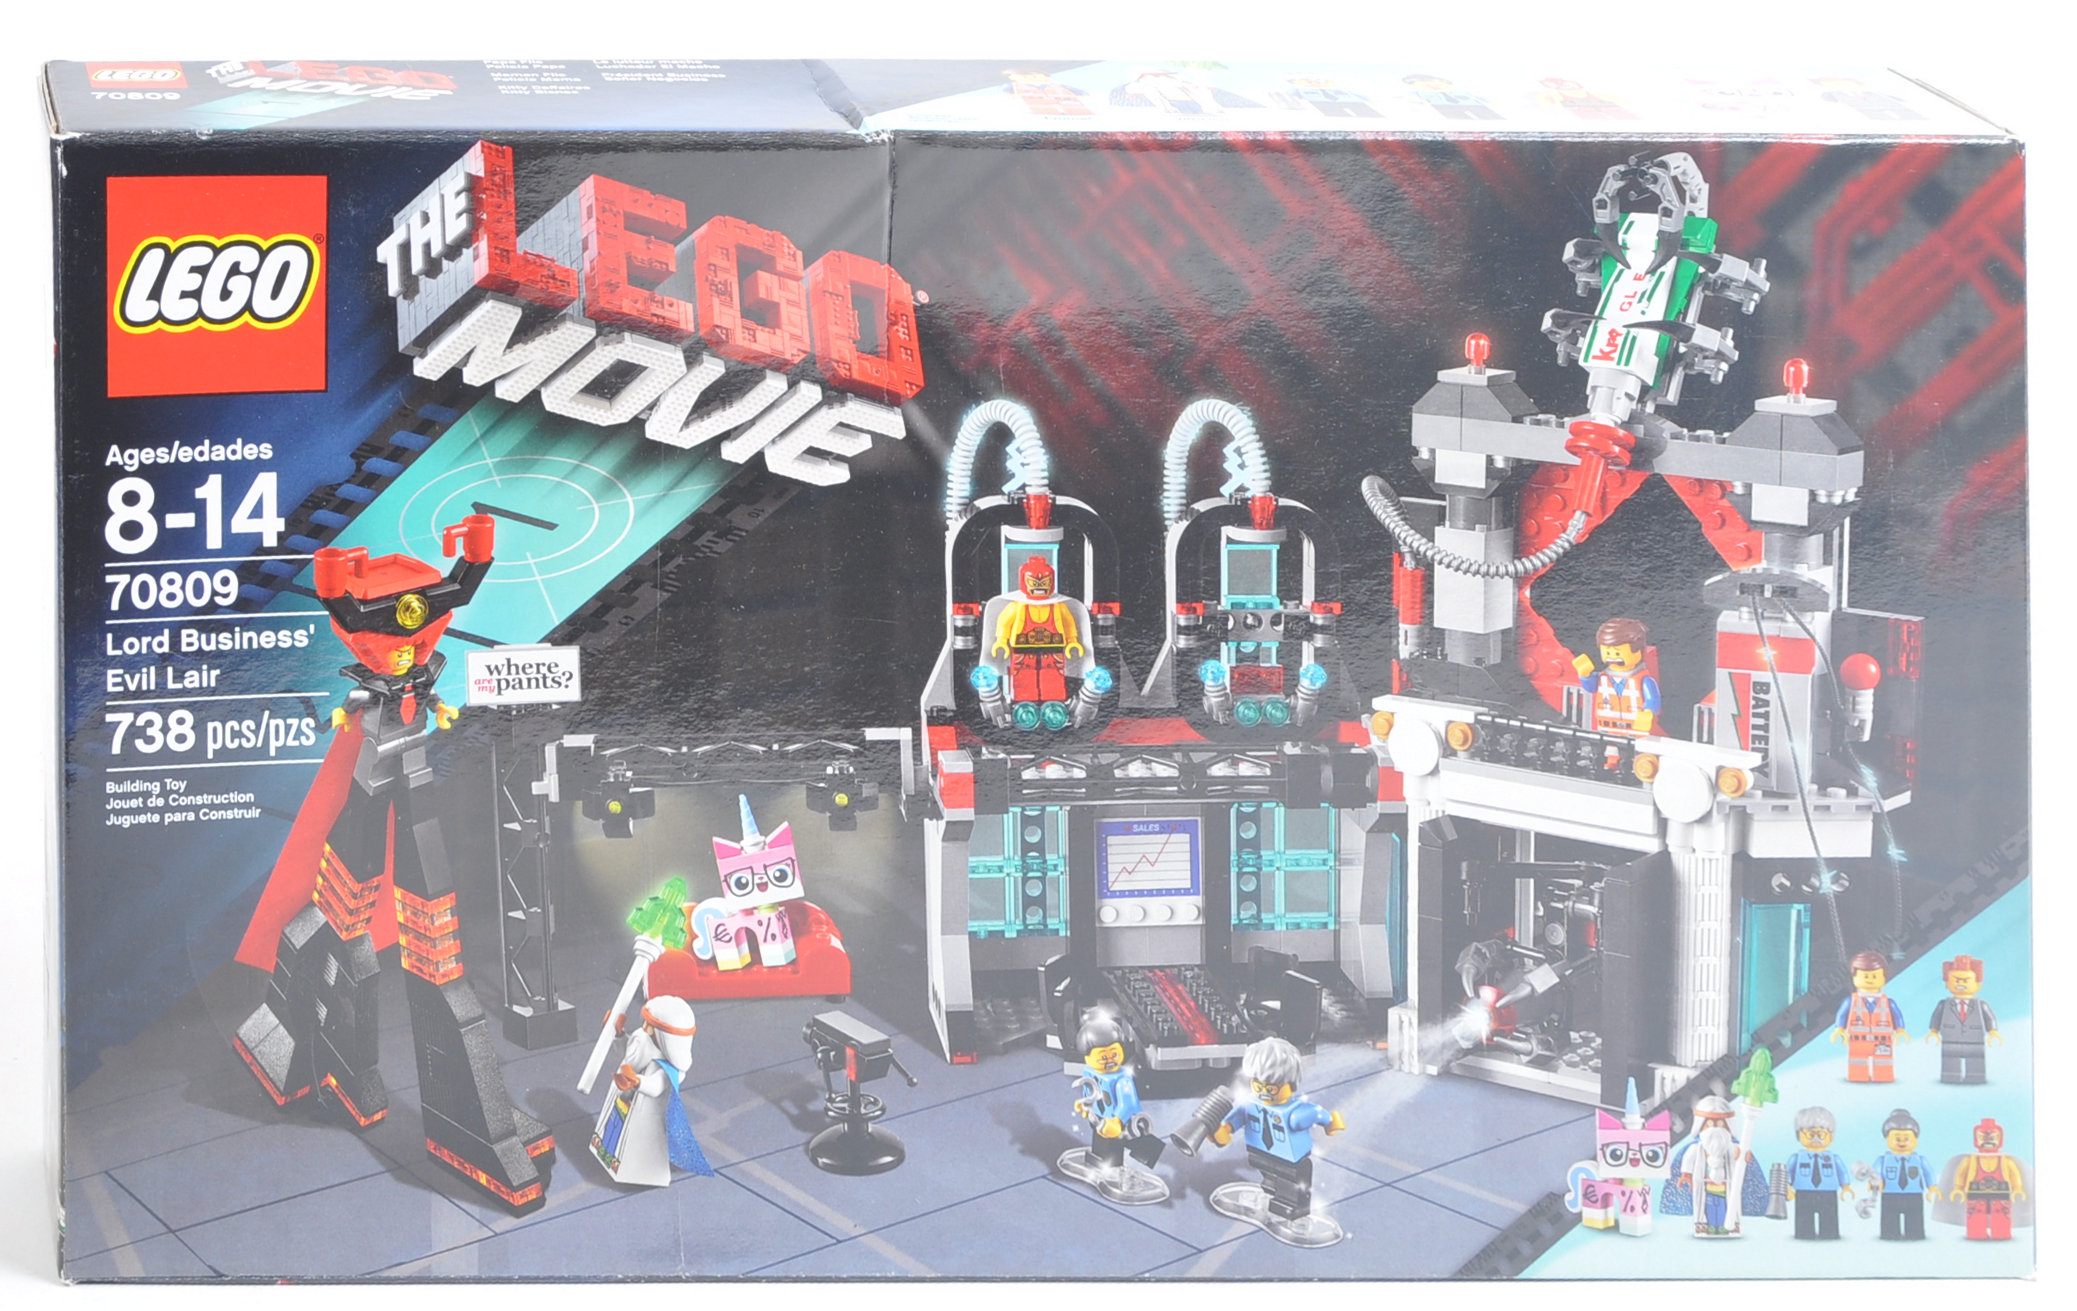 LEGO SET - THE LEGO MOVIE - 70809 - LORD BUSINESS' EVIL LAIR